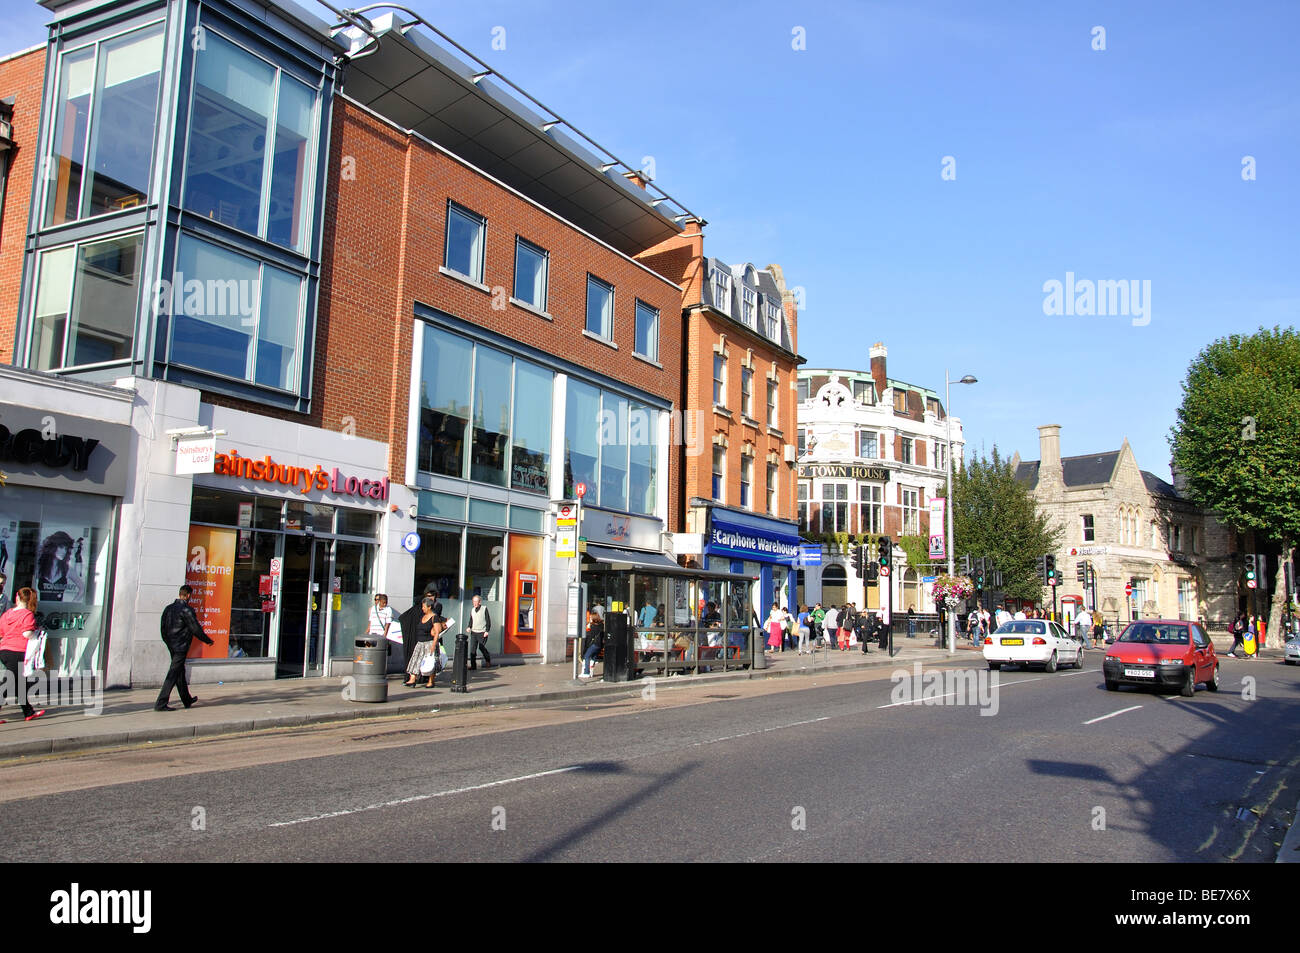 Ealing Broadway, Ealing, London Borough of Ealing, Greater London, Angleterre, Royaume-Uni Banque D'Images